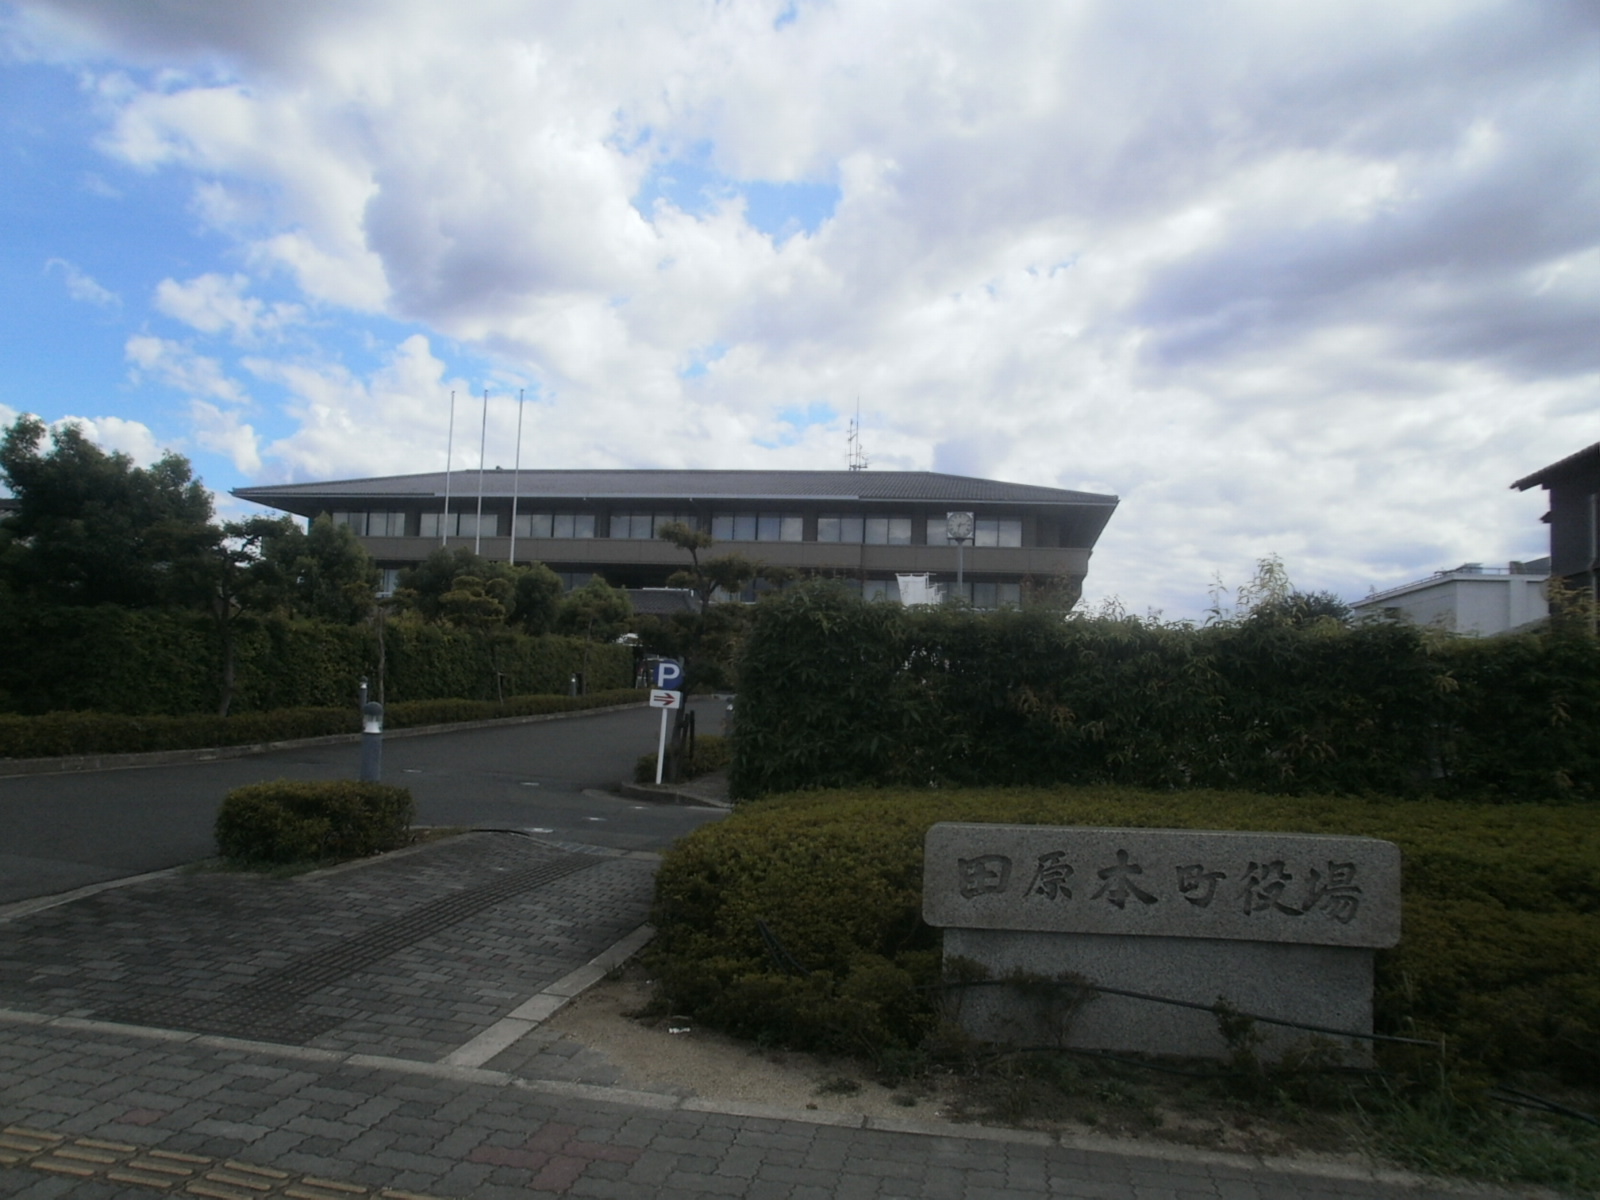 Government office. 945m until tawaramoto office (government office)